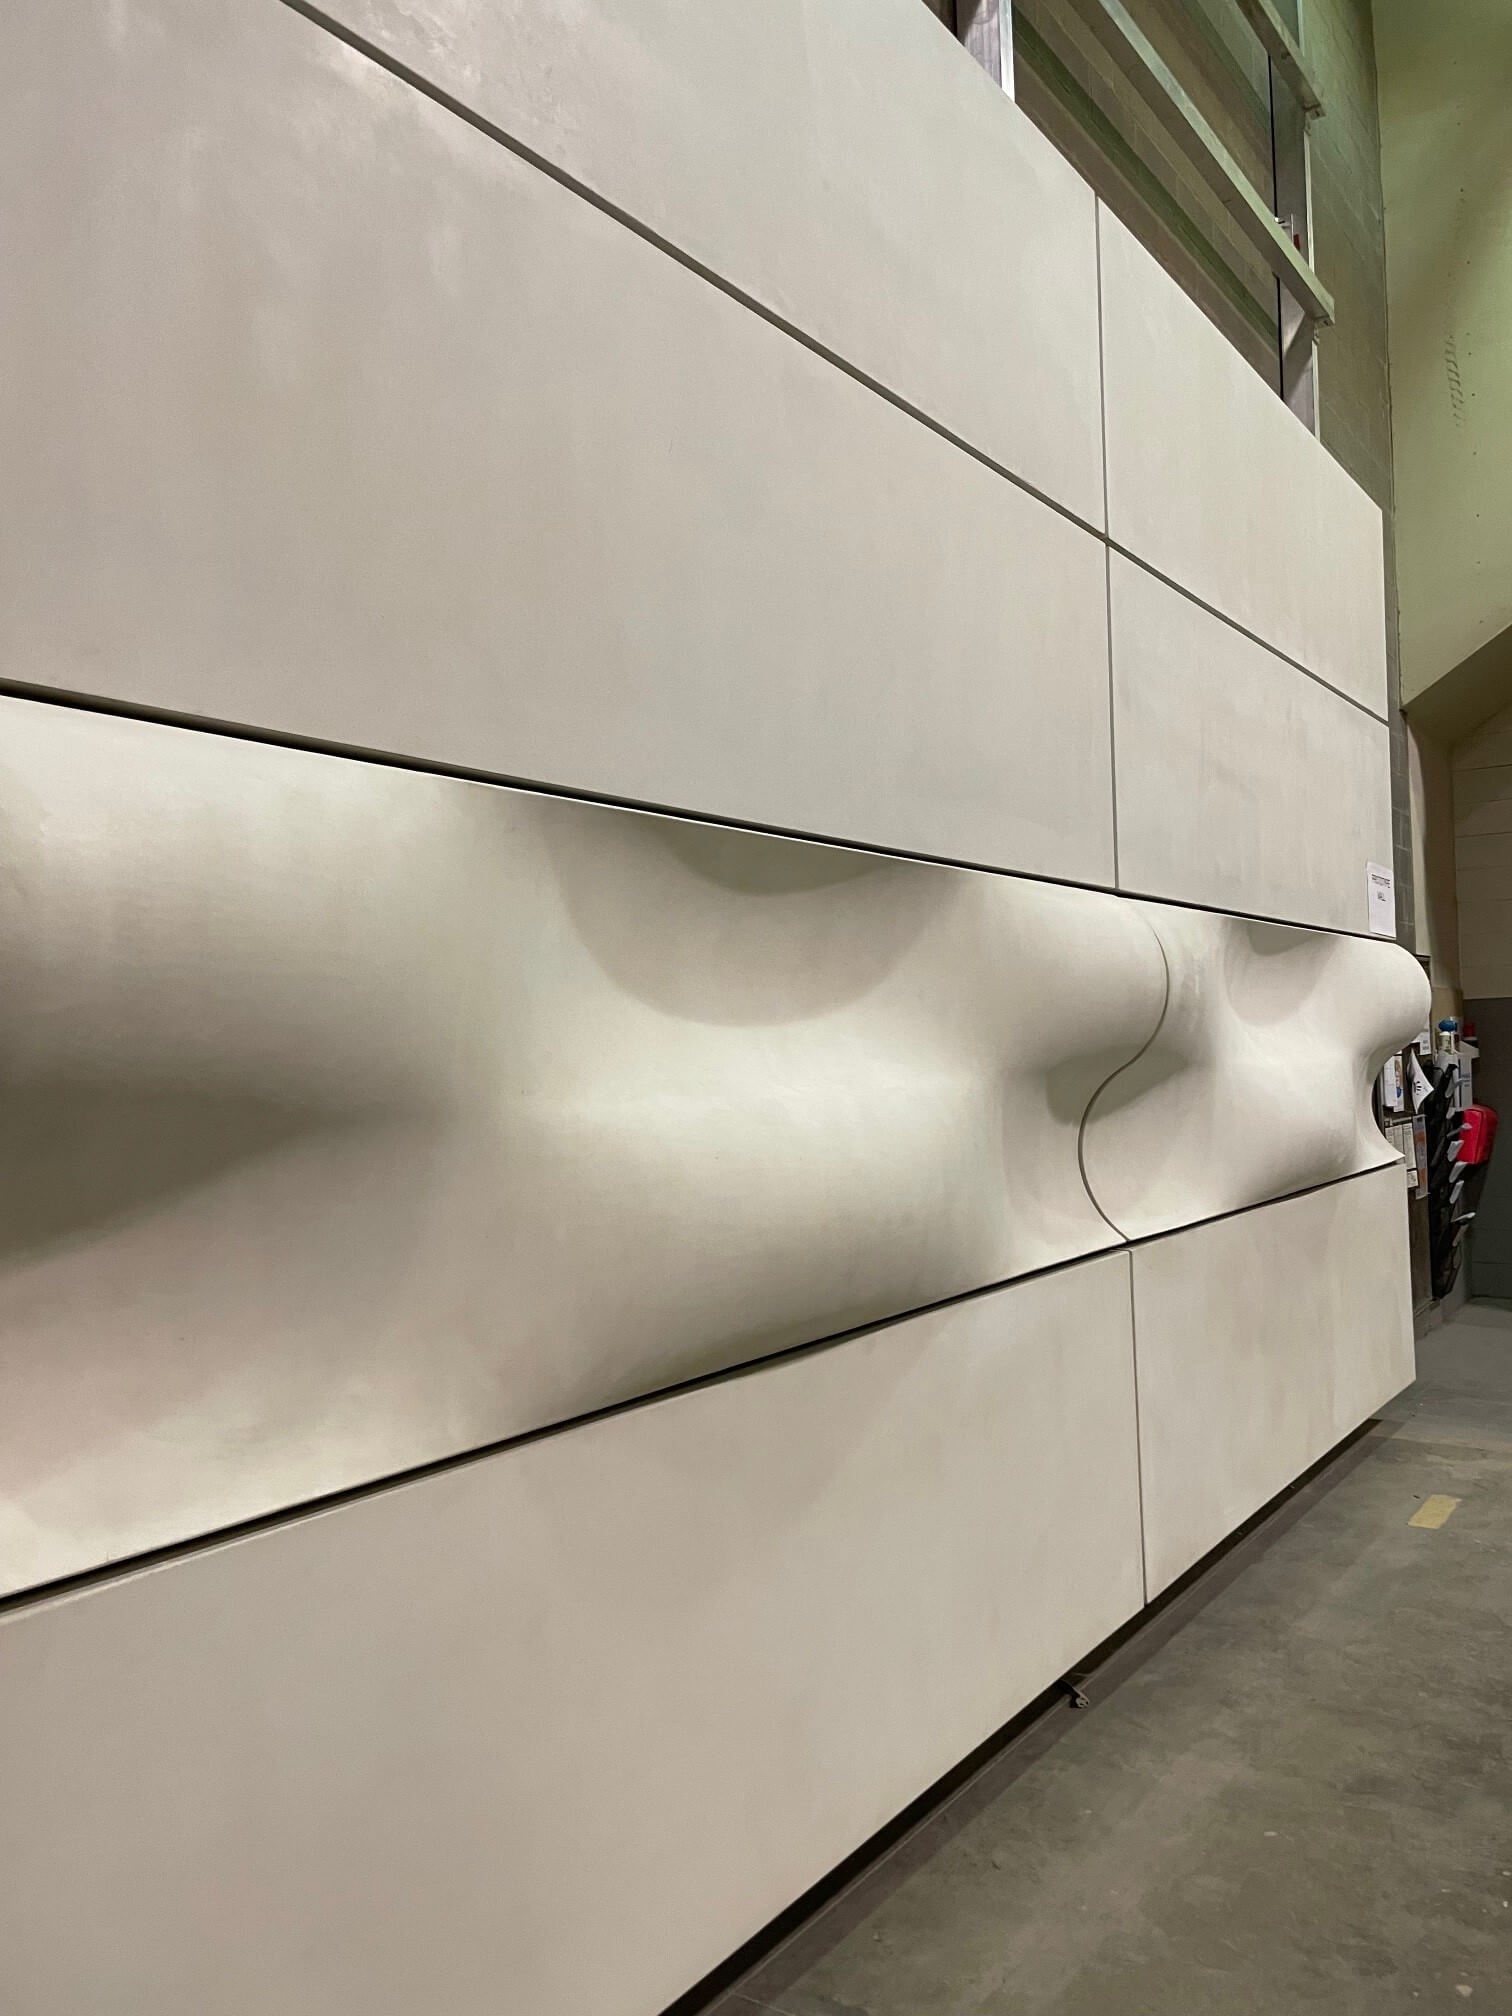 The sample wall showcasing the new building exterior, with wave-like ripples.